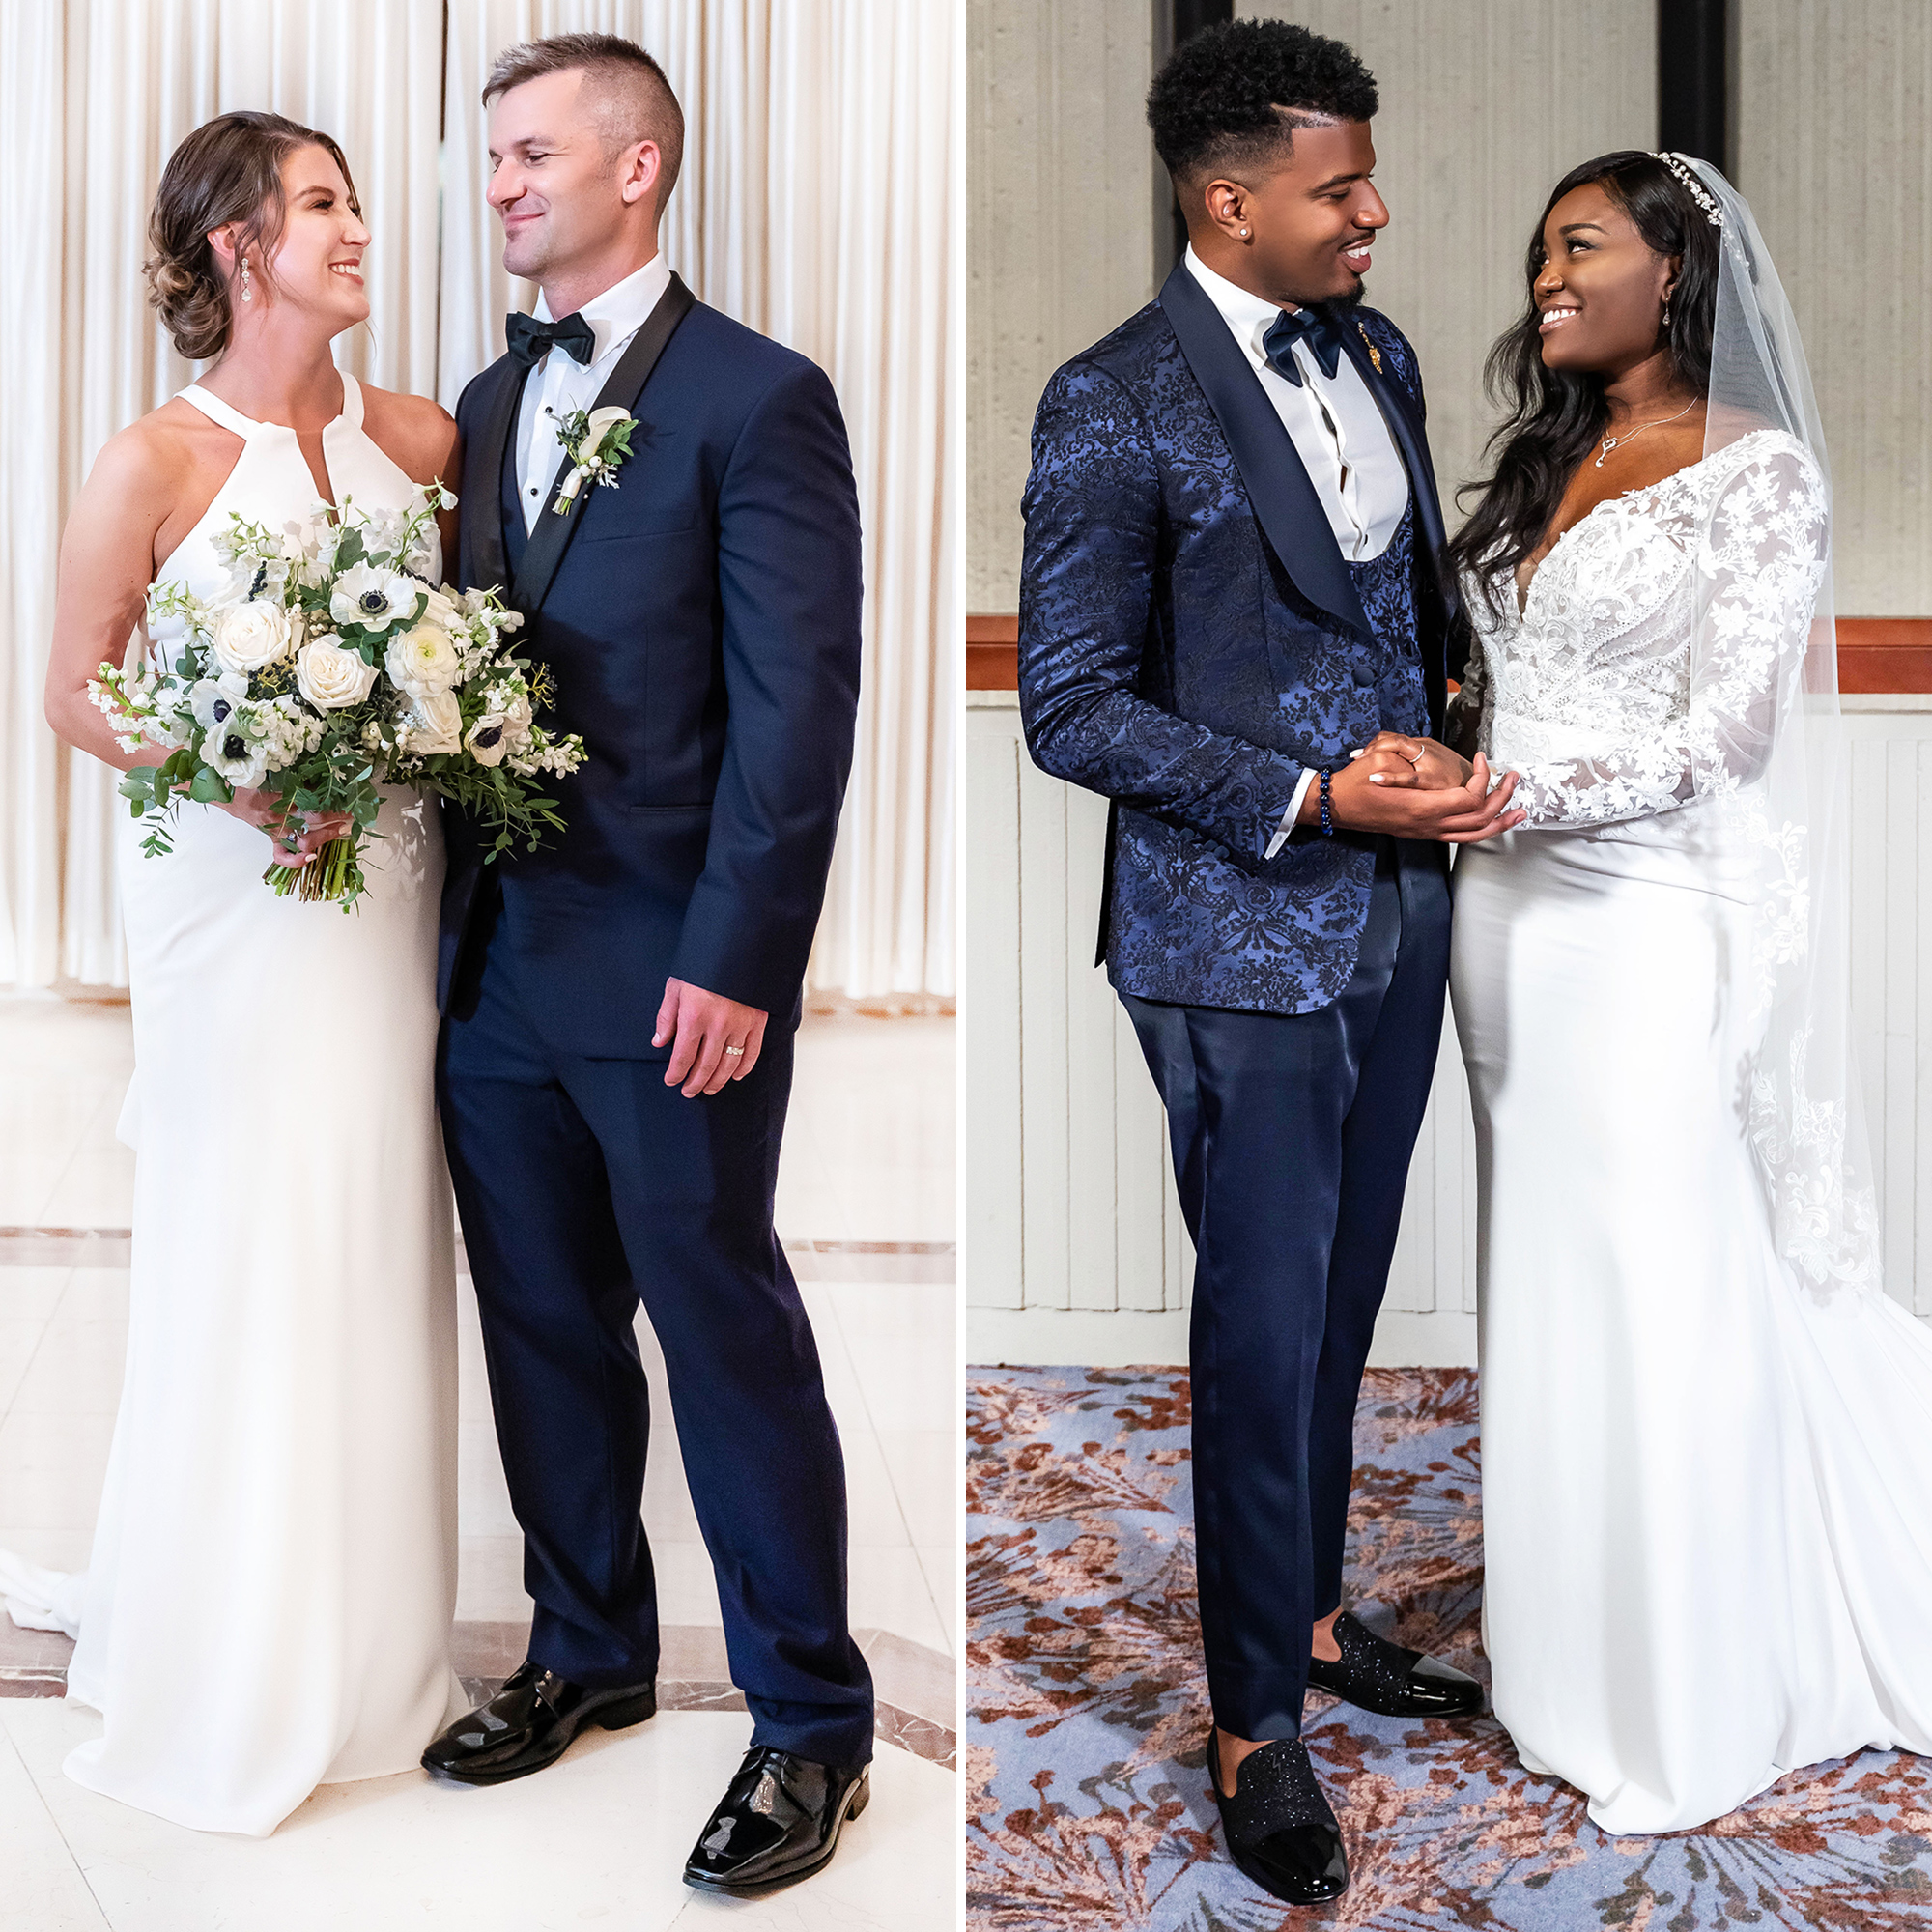 Married at First Sight' Season 12 Cast: Meet the Newlyweds